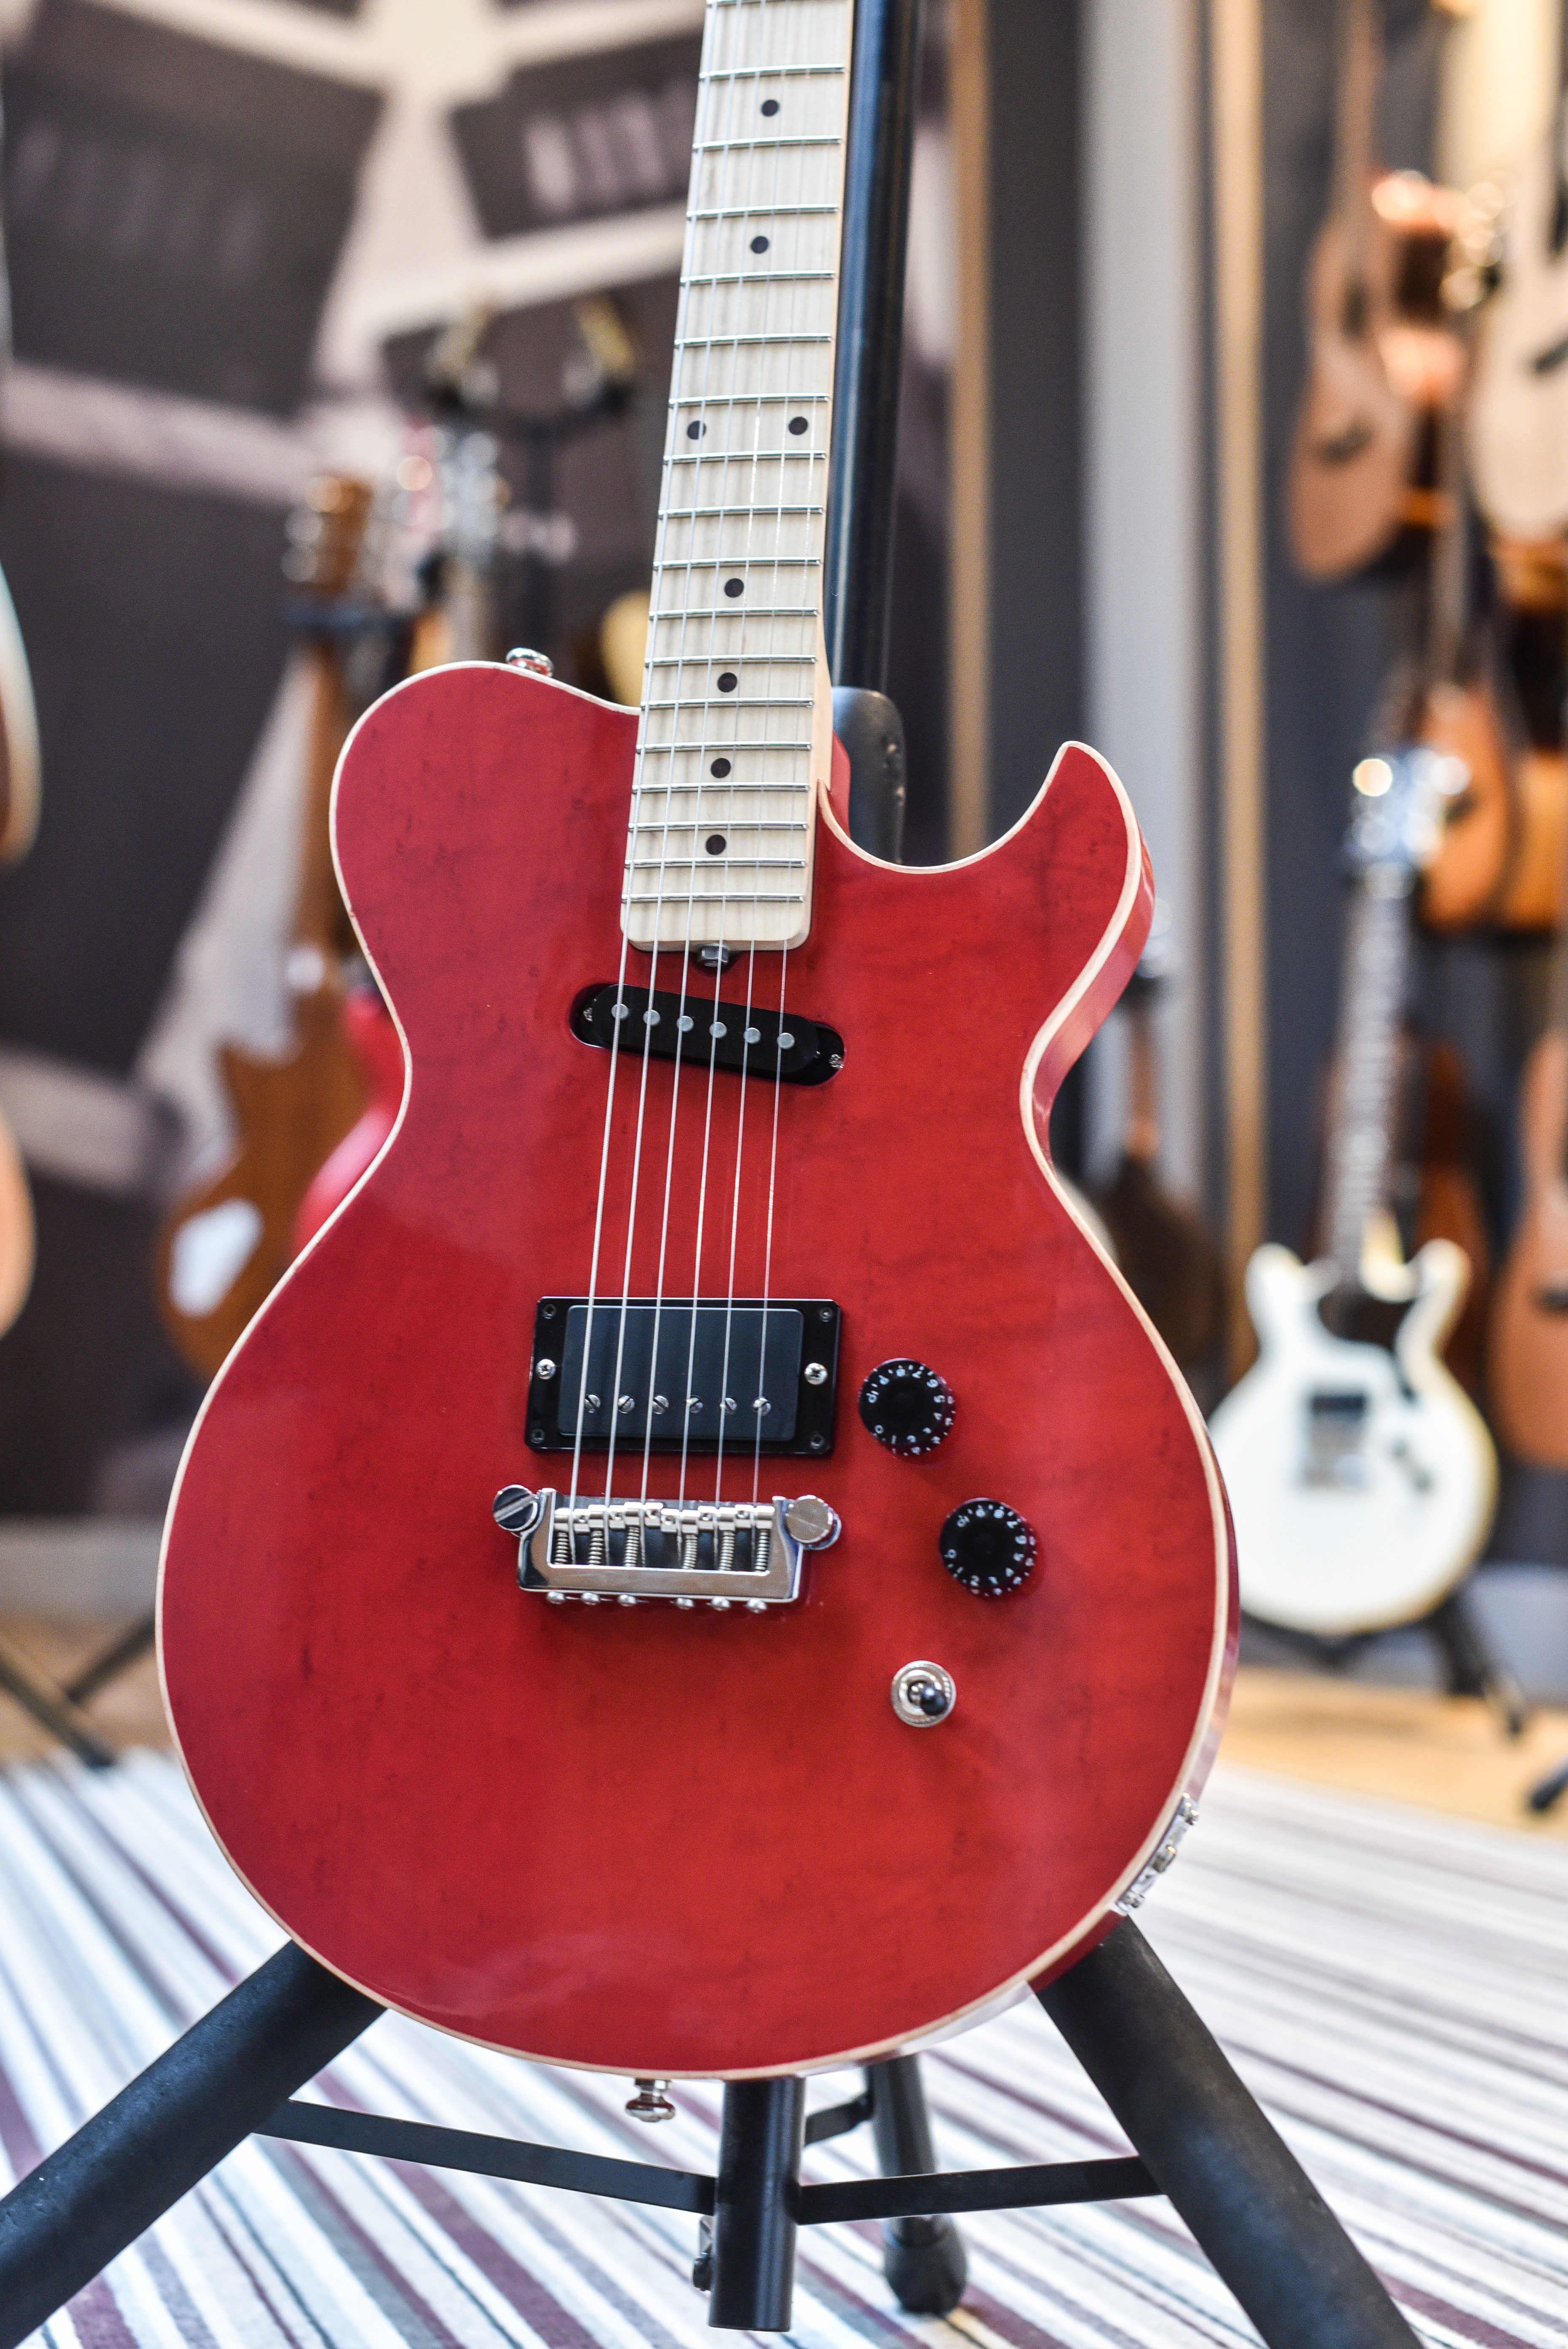 Red Graf Deluxe body